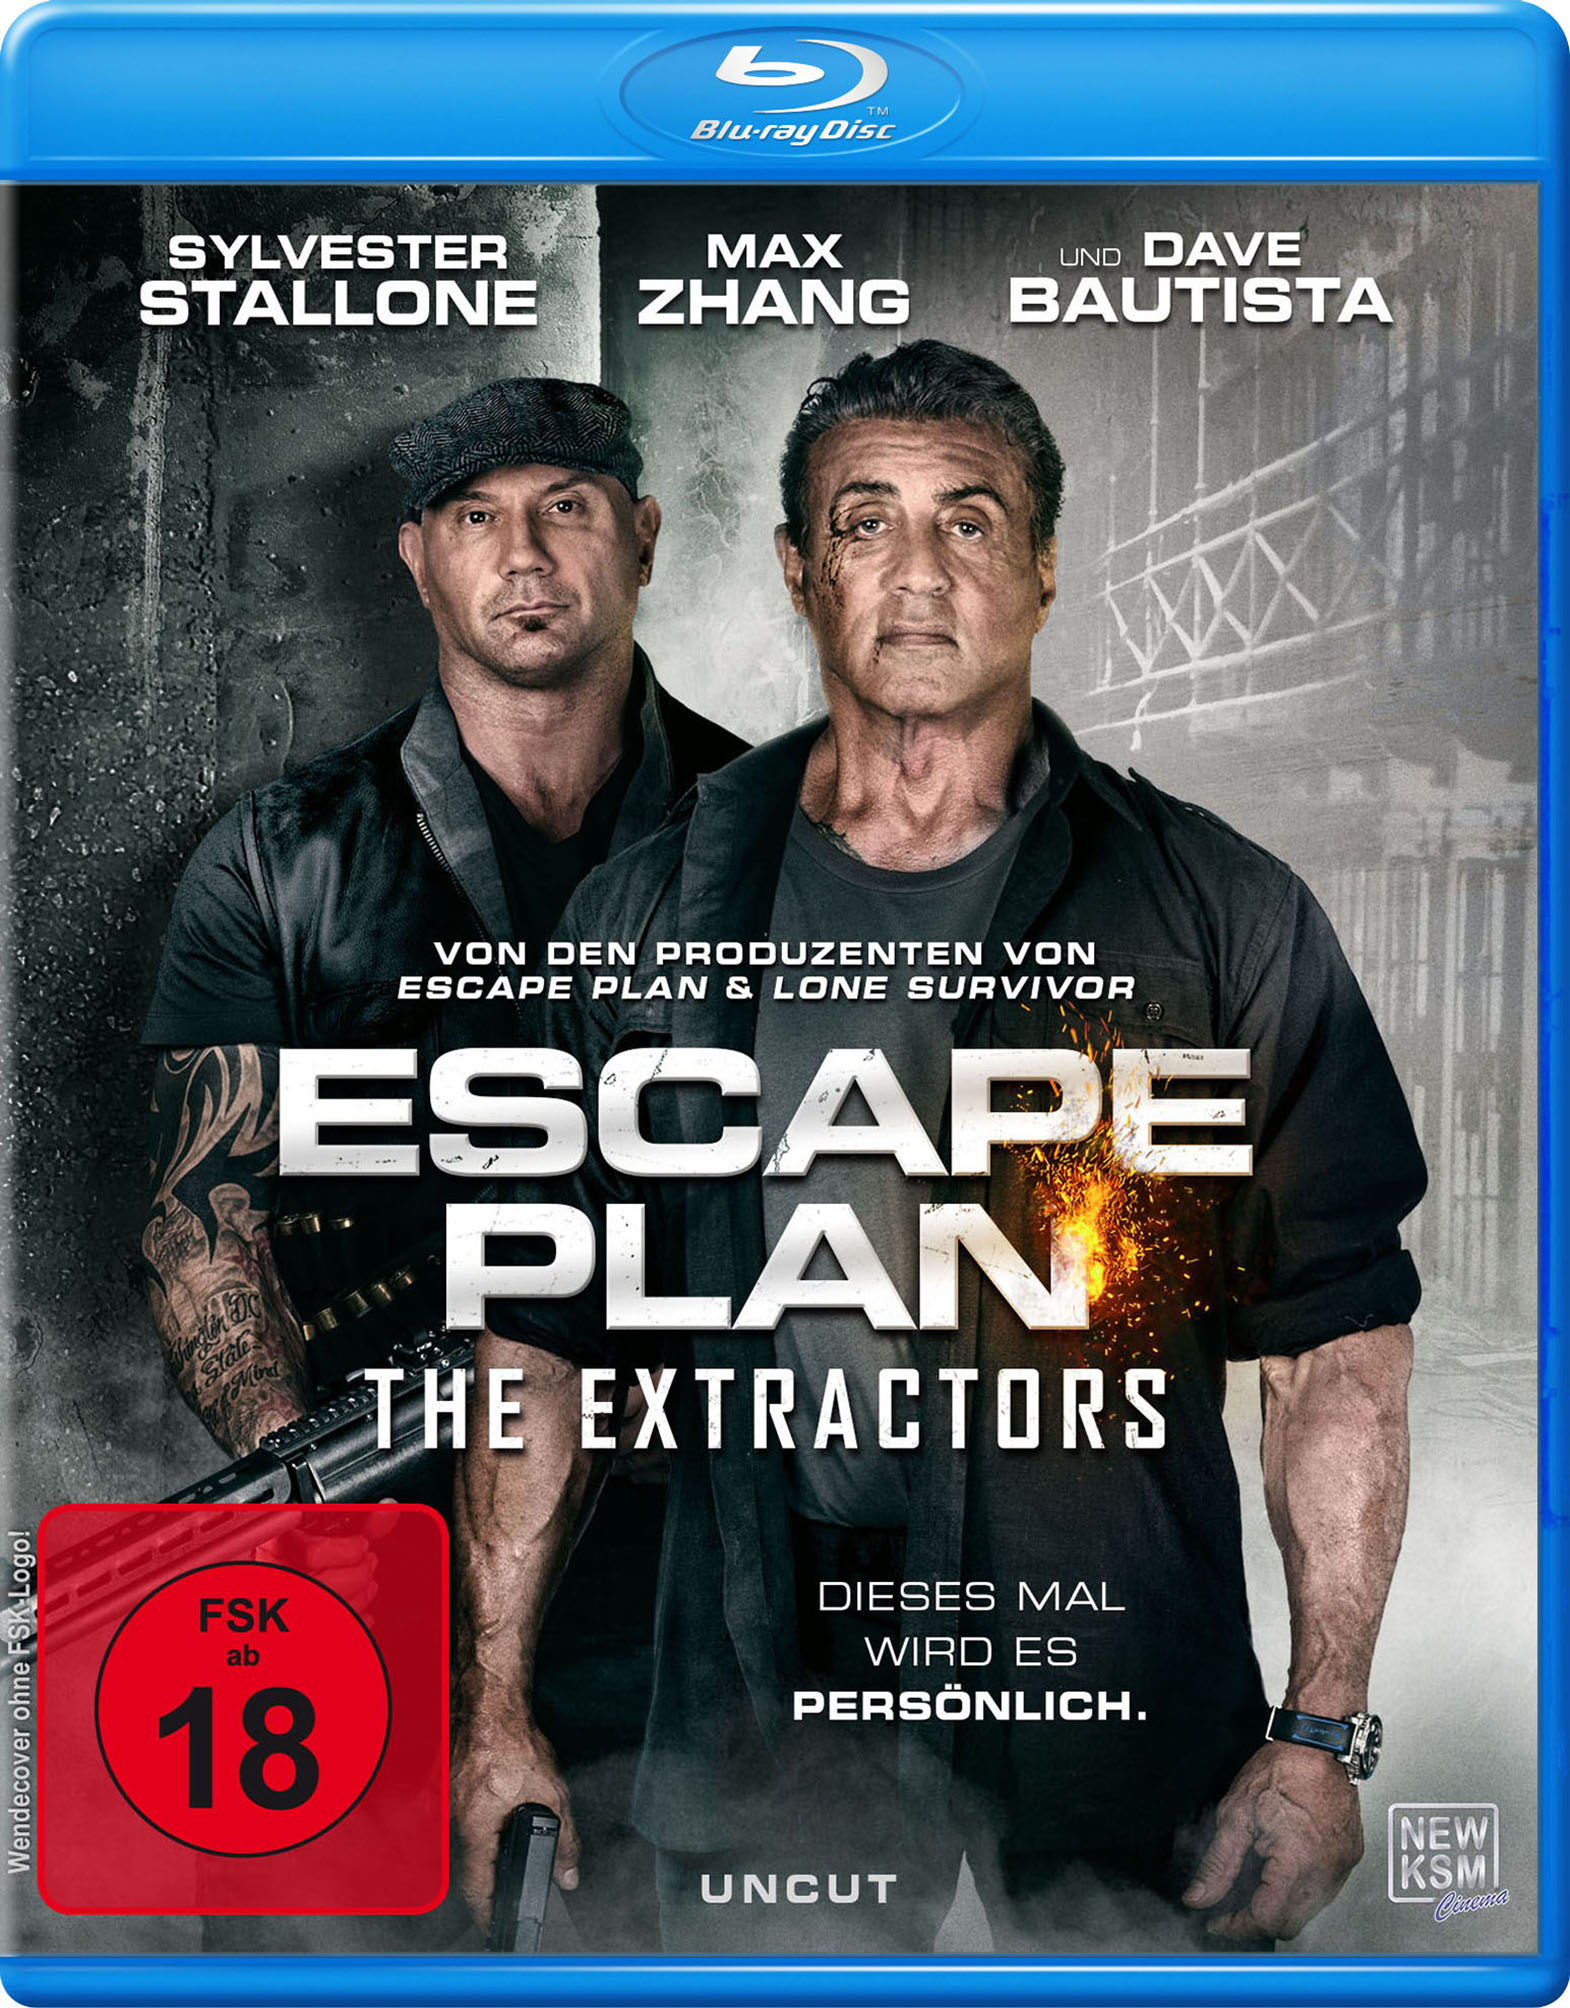 Escape Plan The Extractors (Blu-ray)